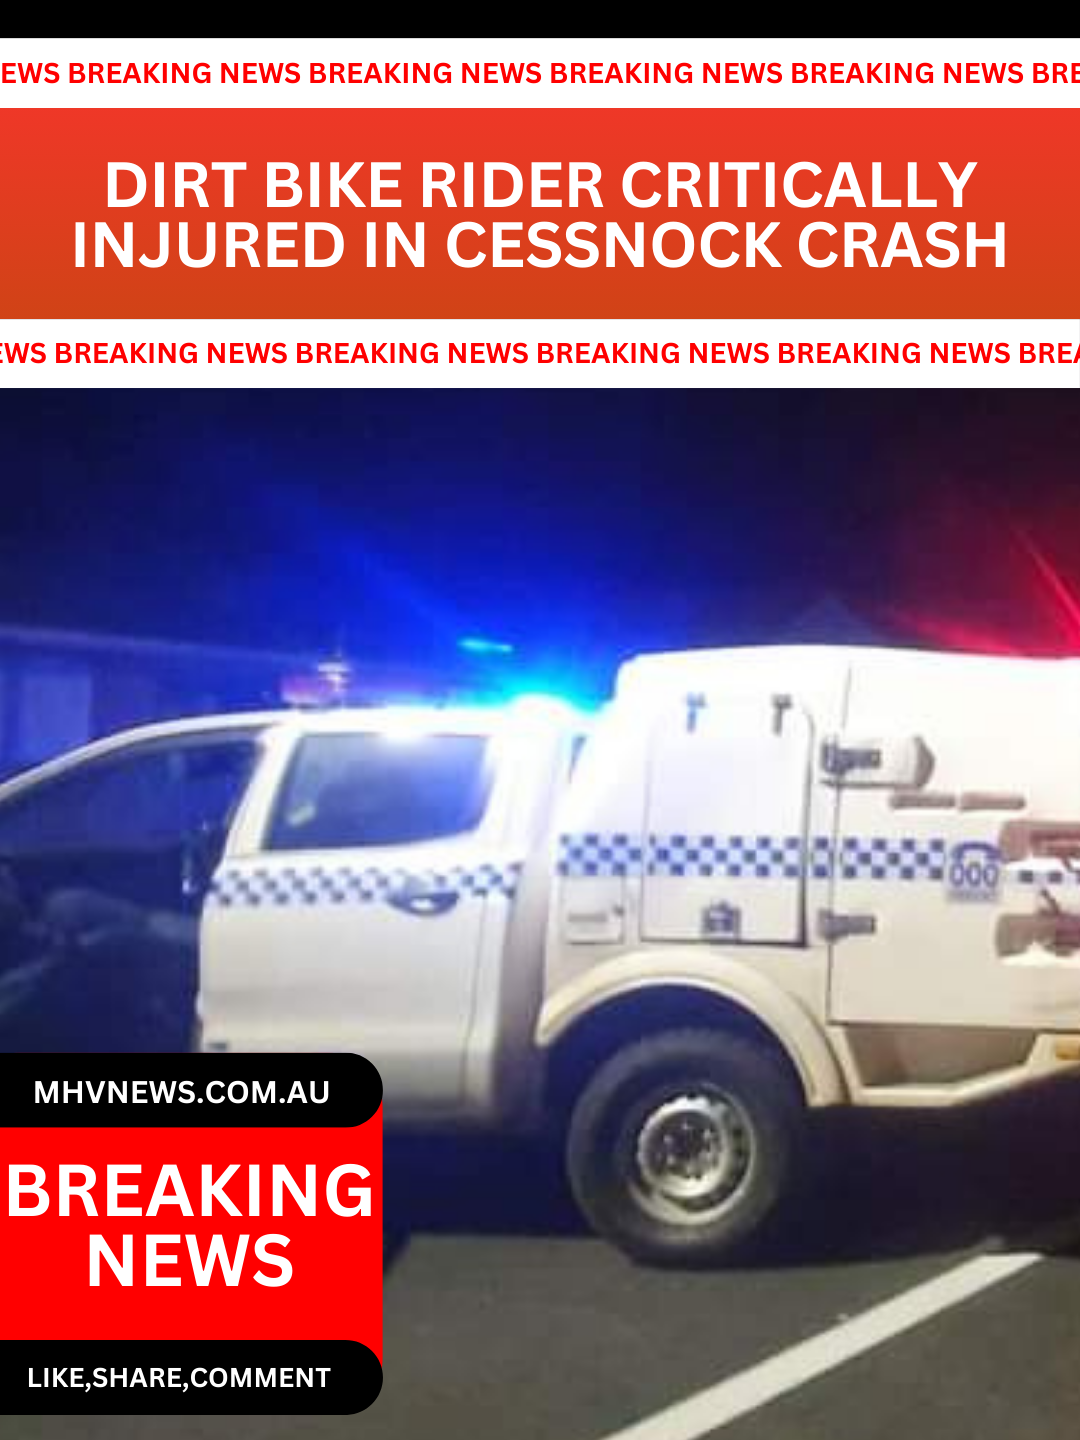 You are currently viewing Breaking News: Dirt Bike Rider Critically Injured in Cessnock Crash